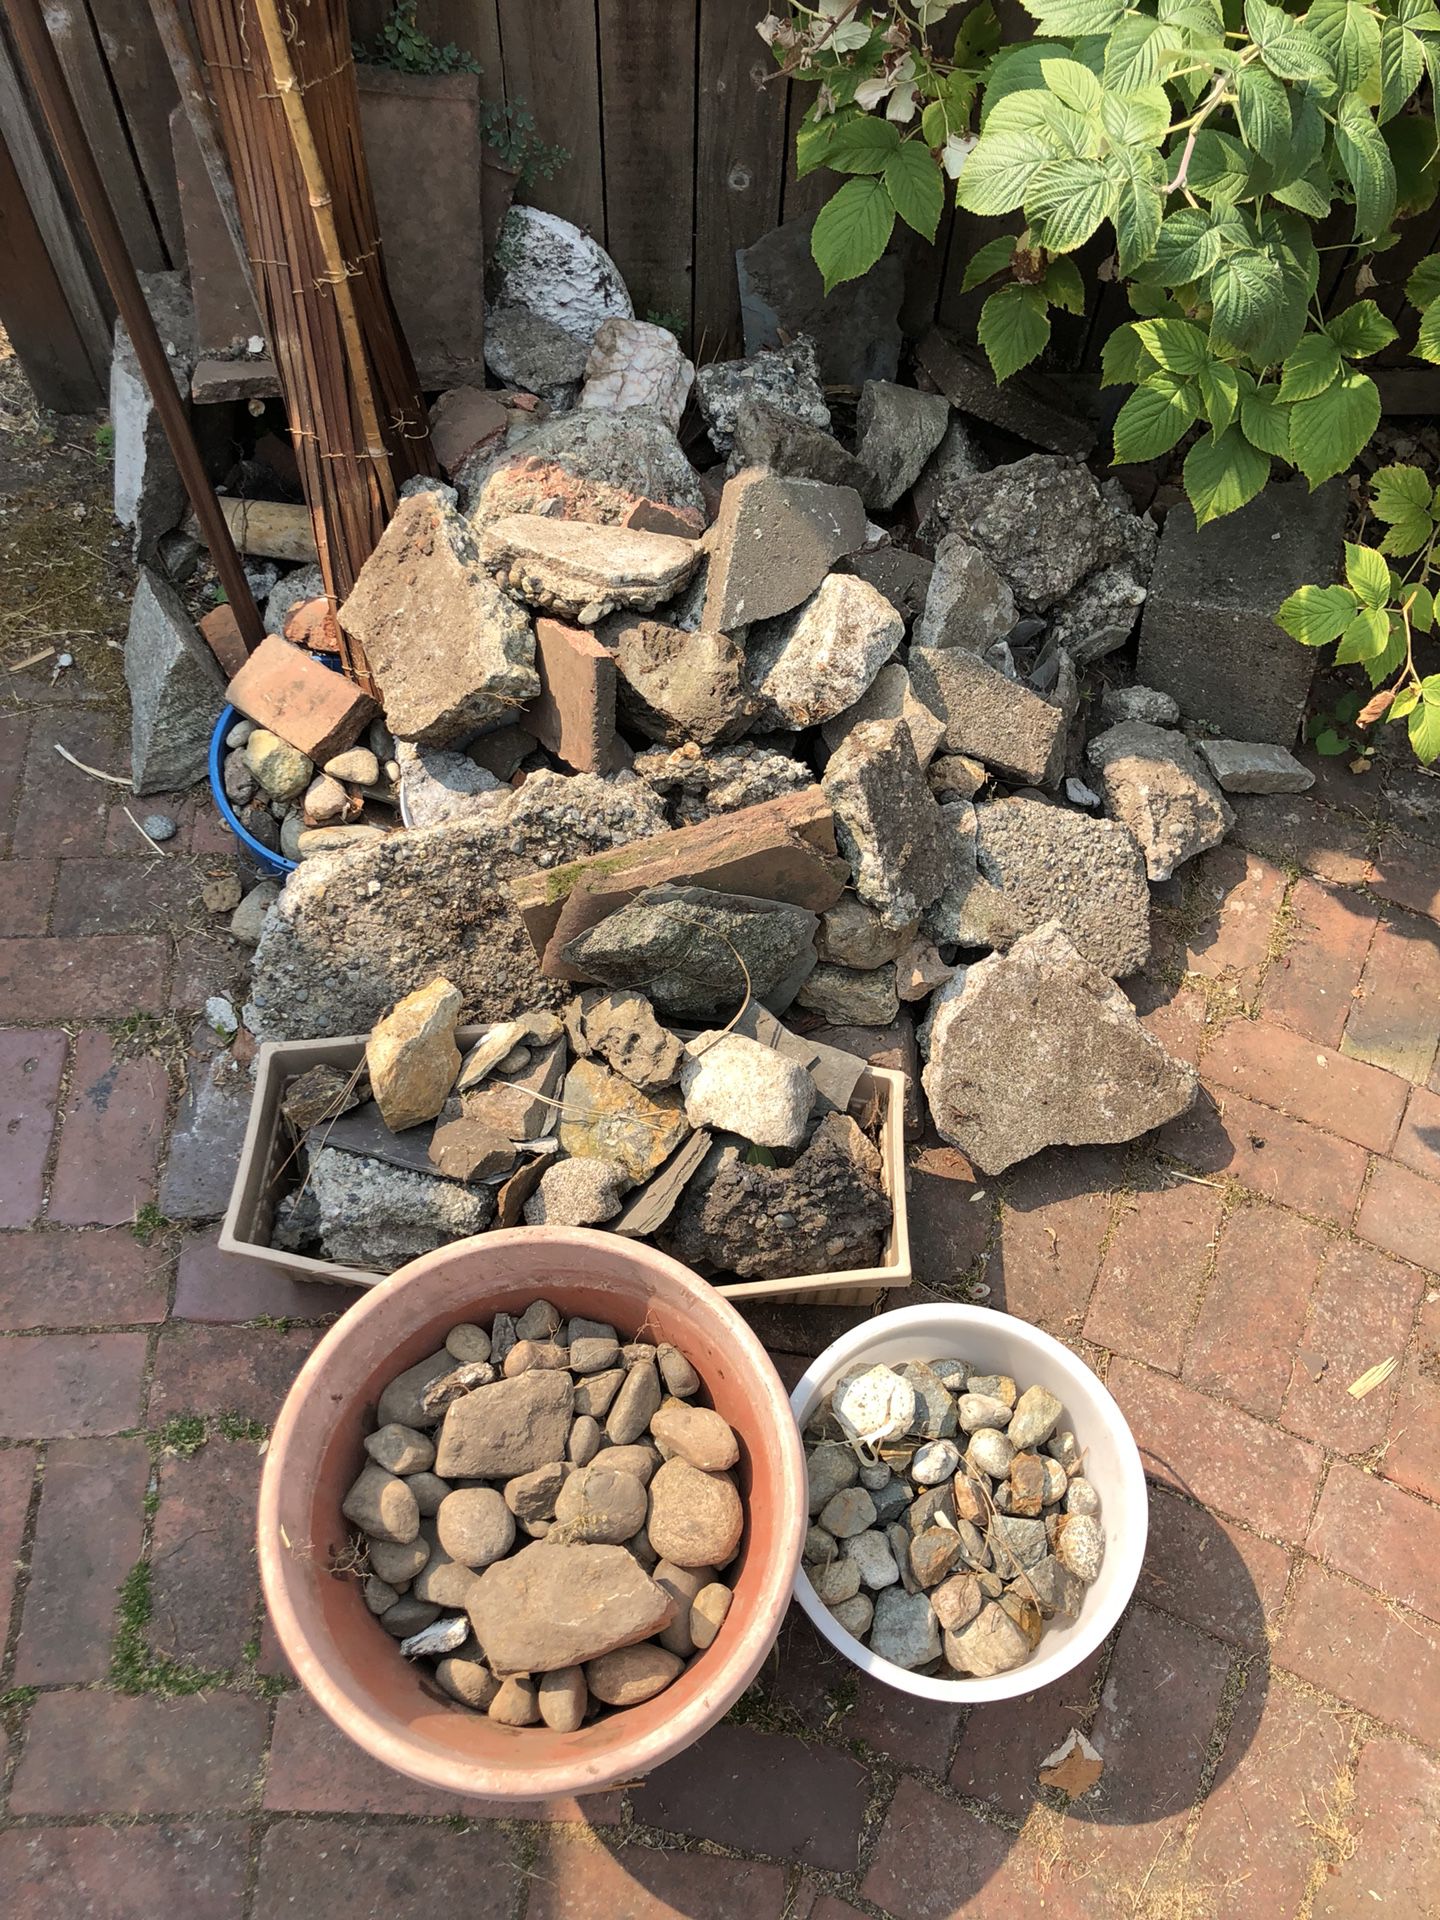 Free outdoor variety of rocks.